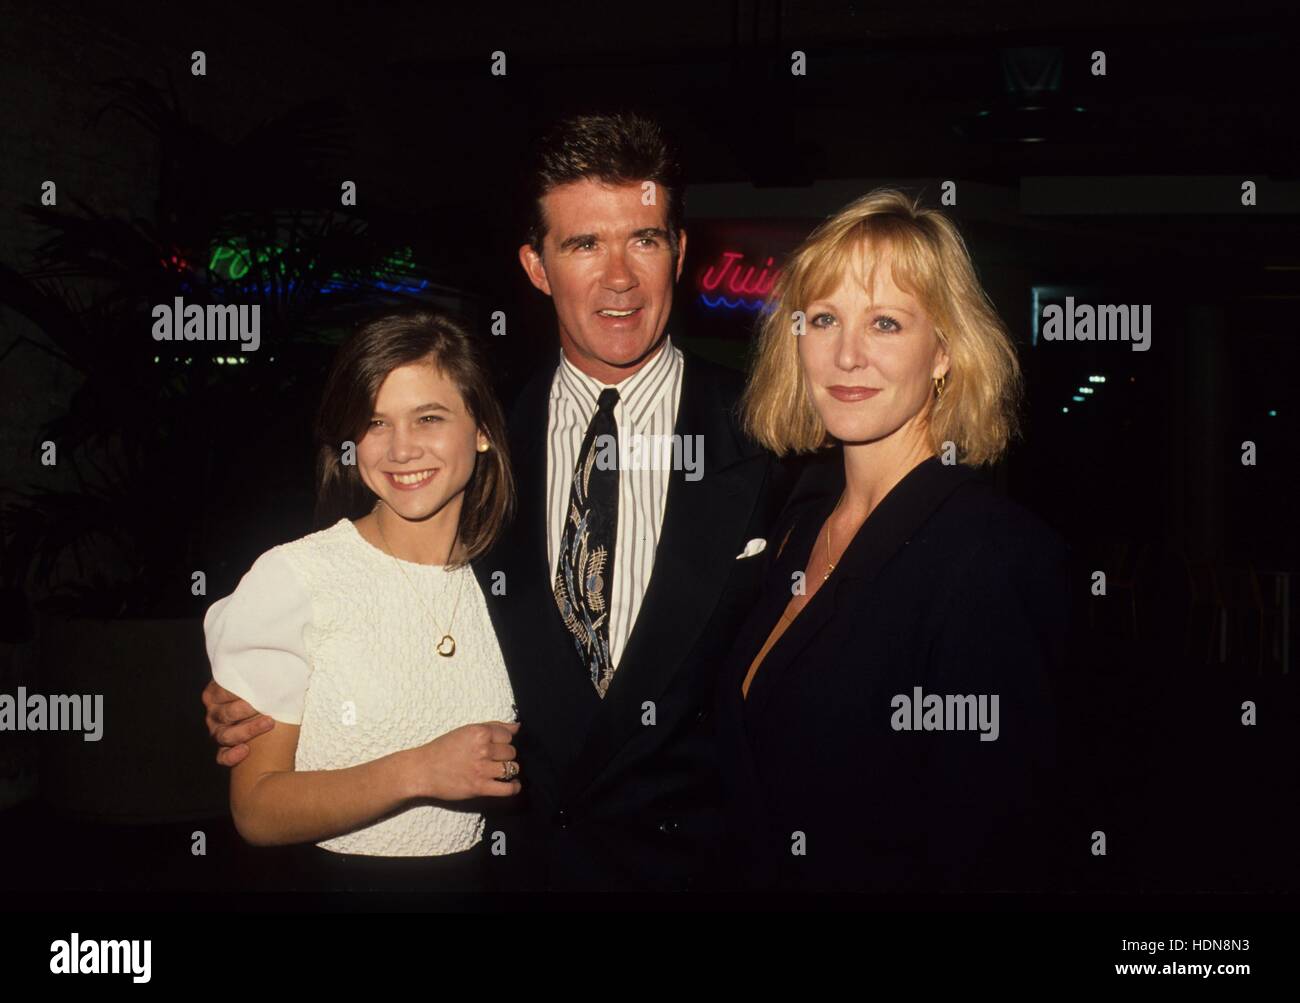 Growing Pains' star Ashley Johnson on working with Alan Thicke: 'I feel so  lucky